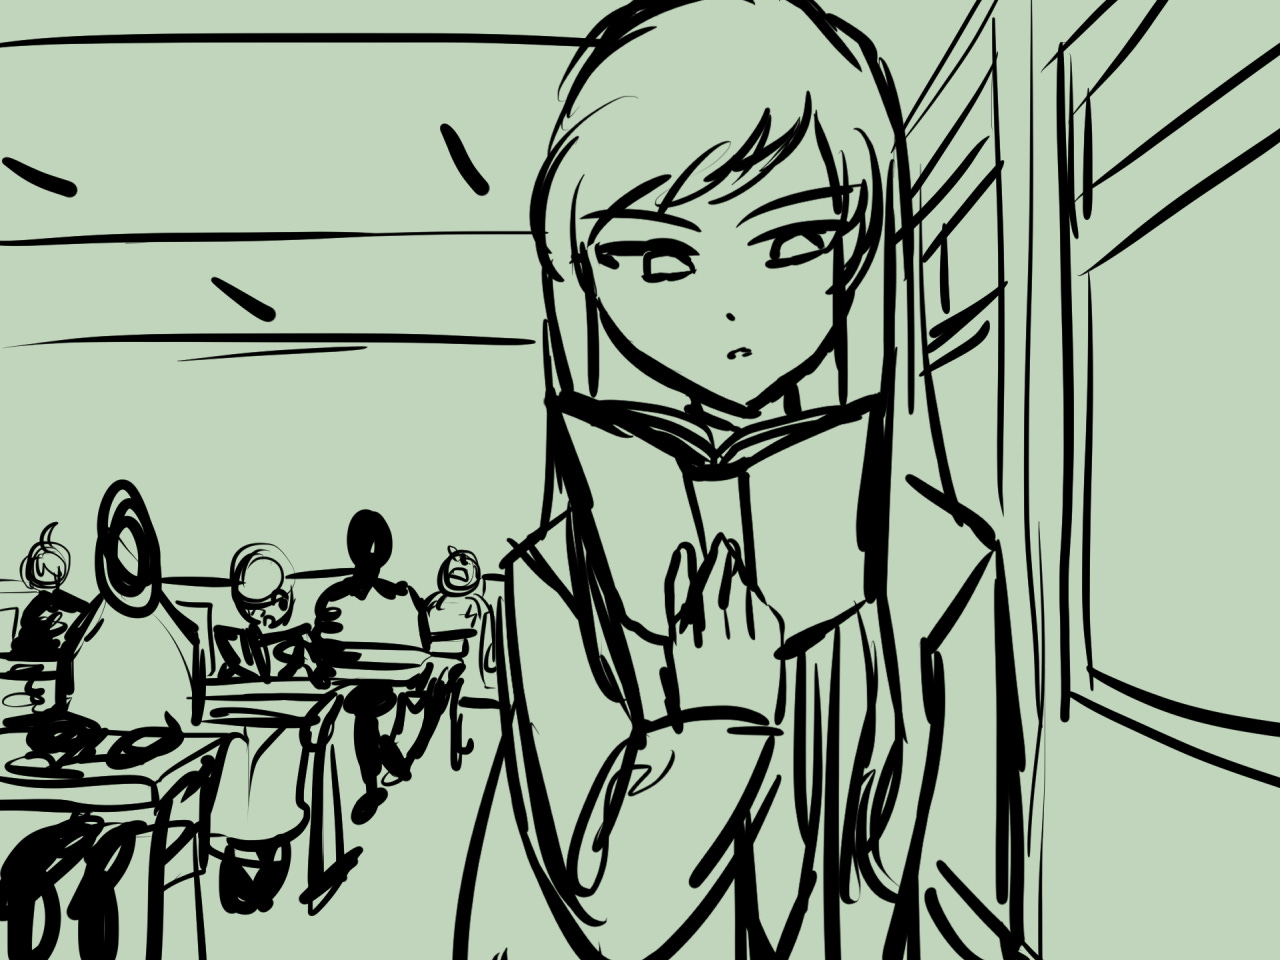 work in progress of the remade CG where Delilah is doing a class reading